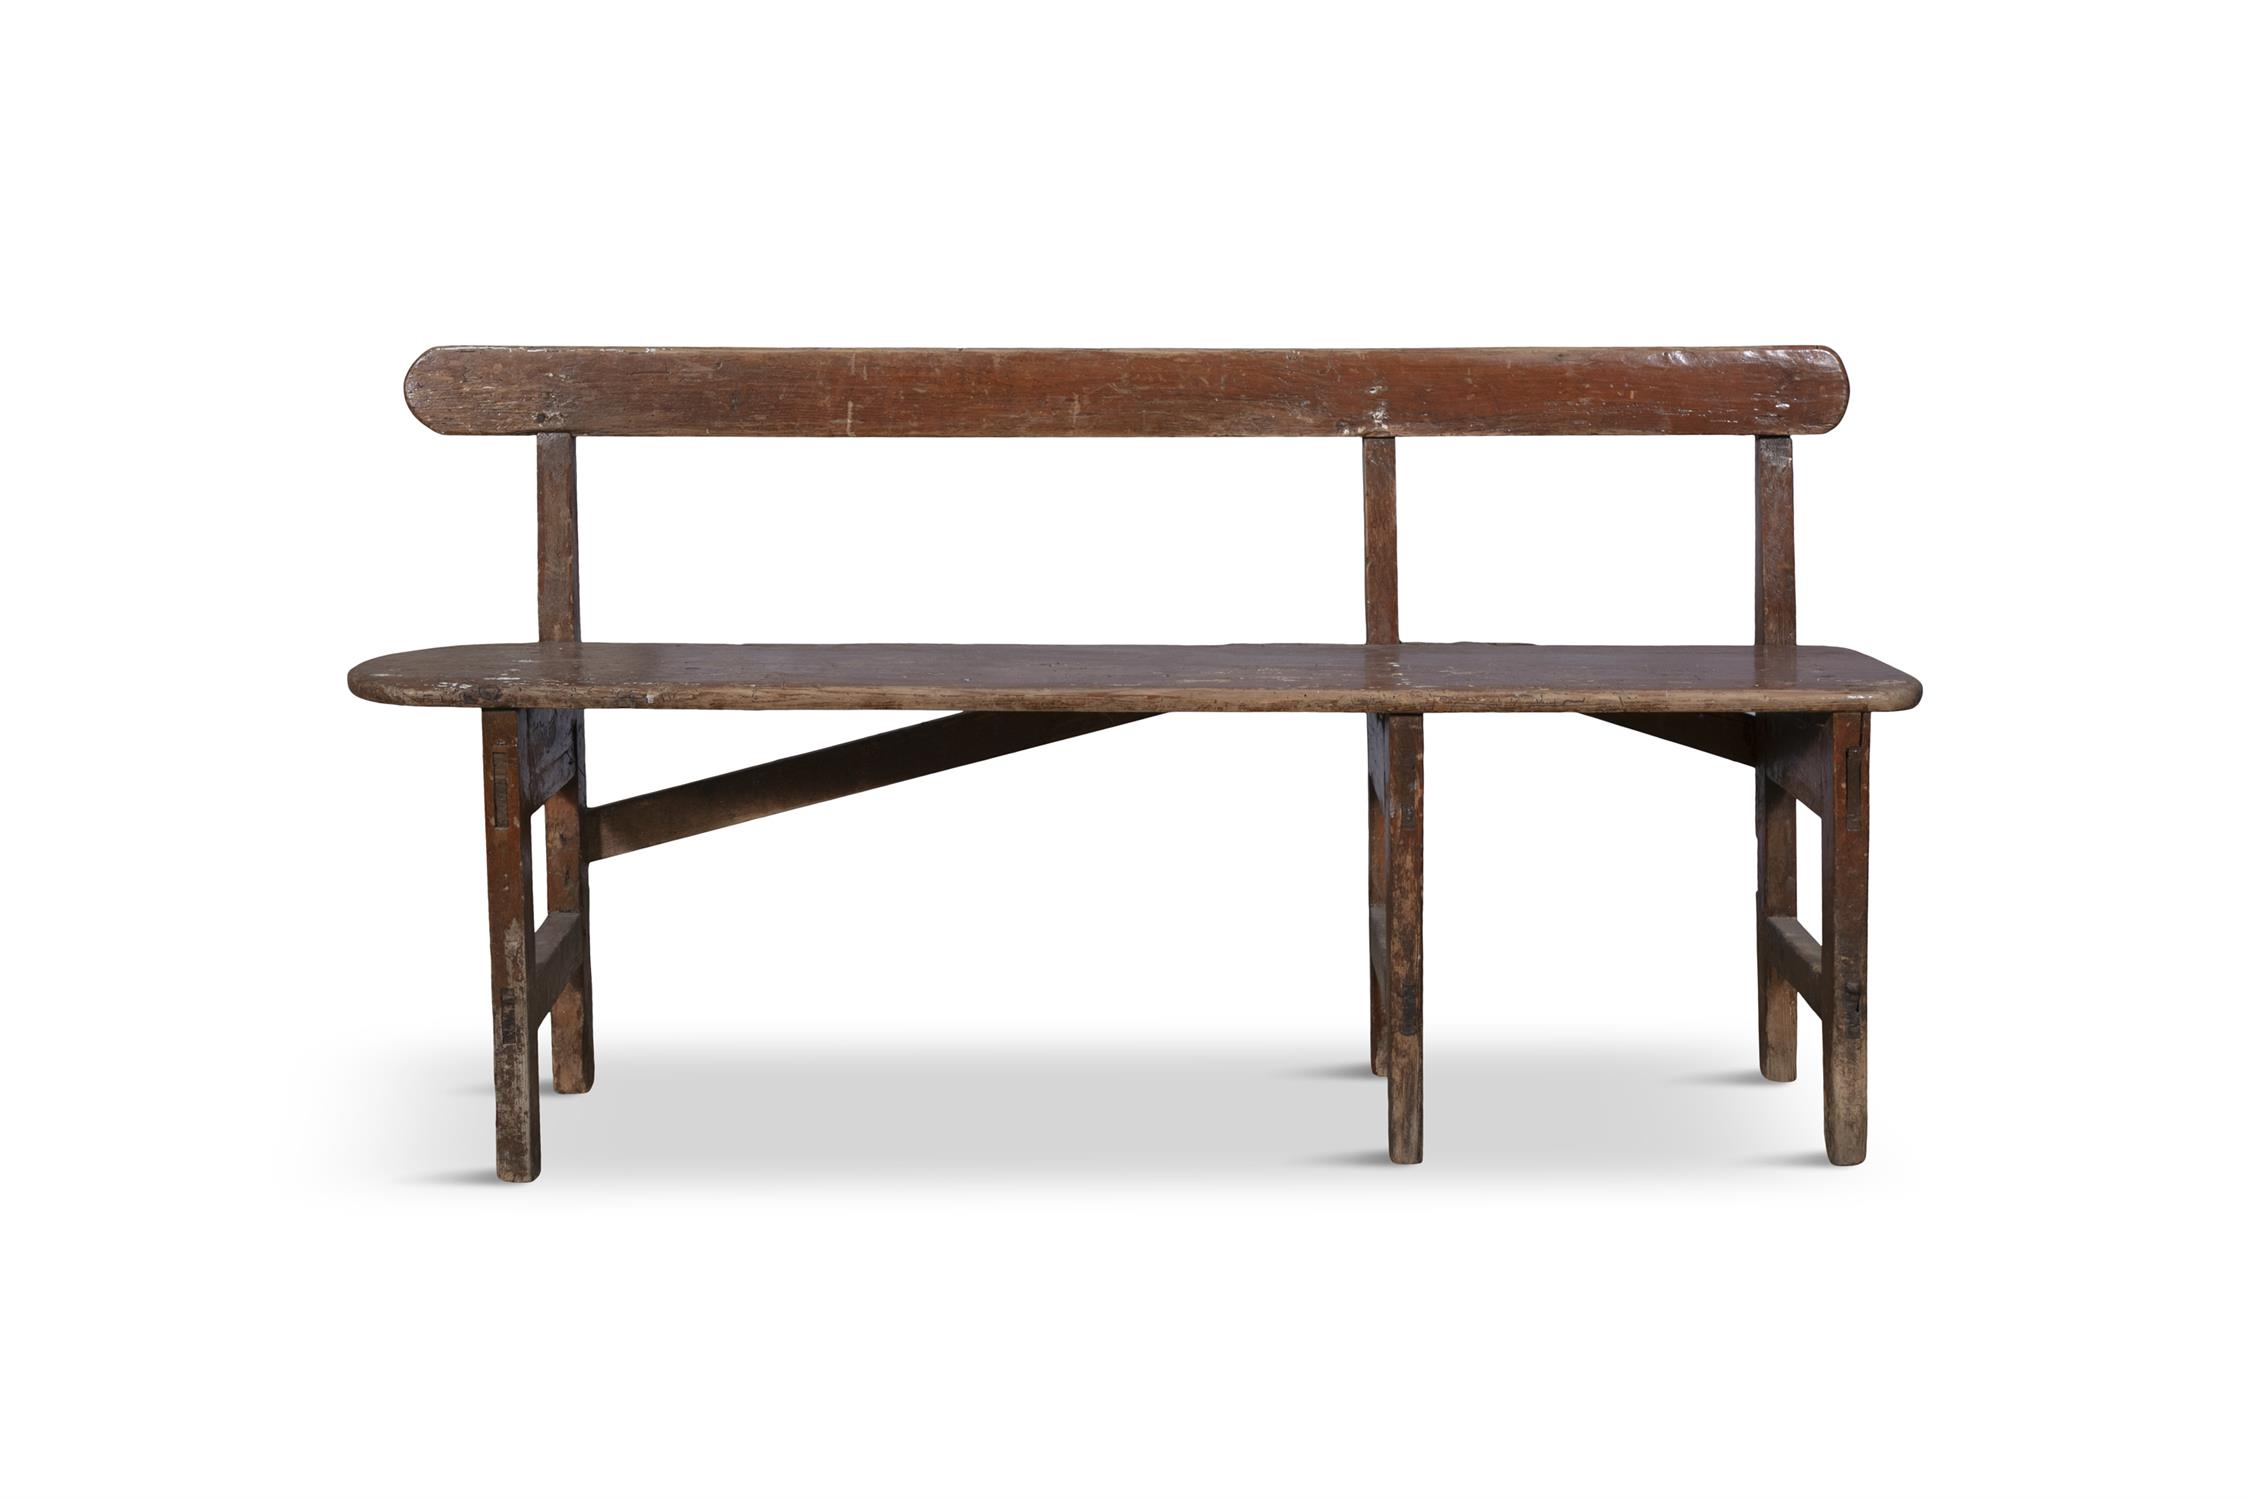 A COMPACT PAINTED PINE LONG RECTANGULAR BENCH with plain slat back and seat on three paired legs